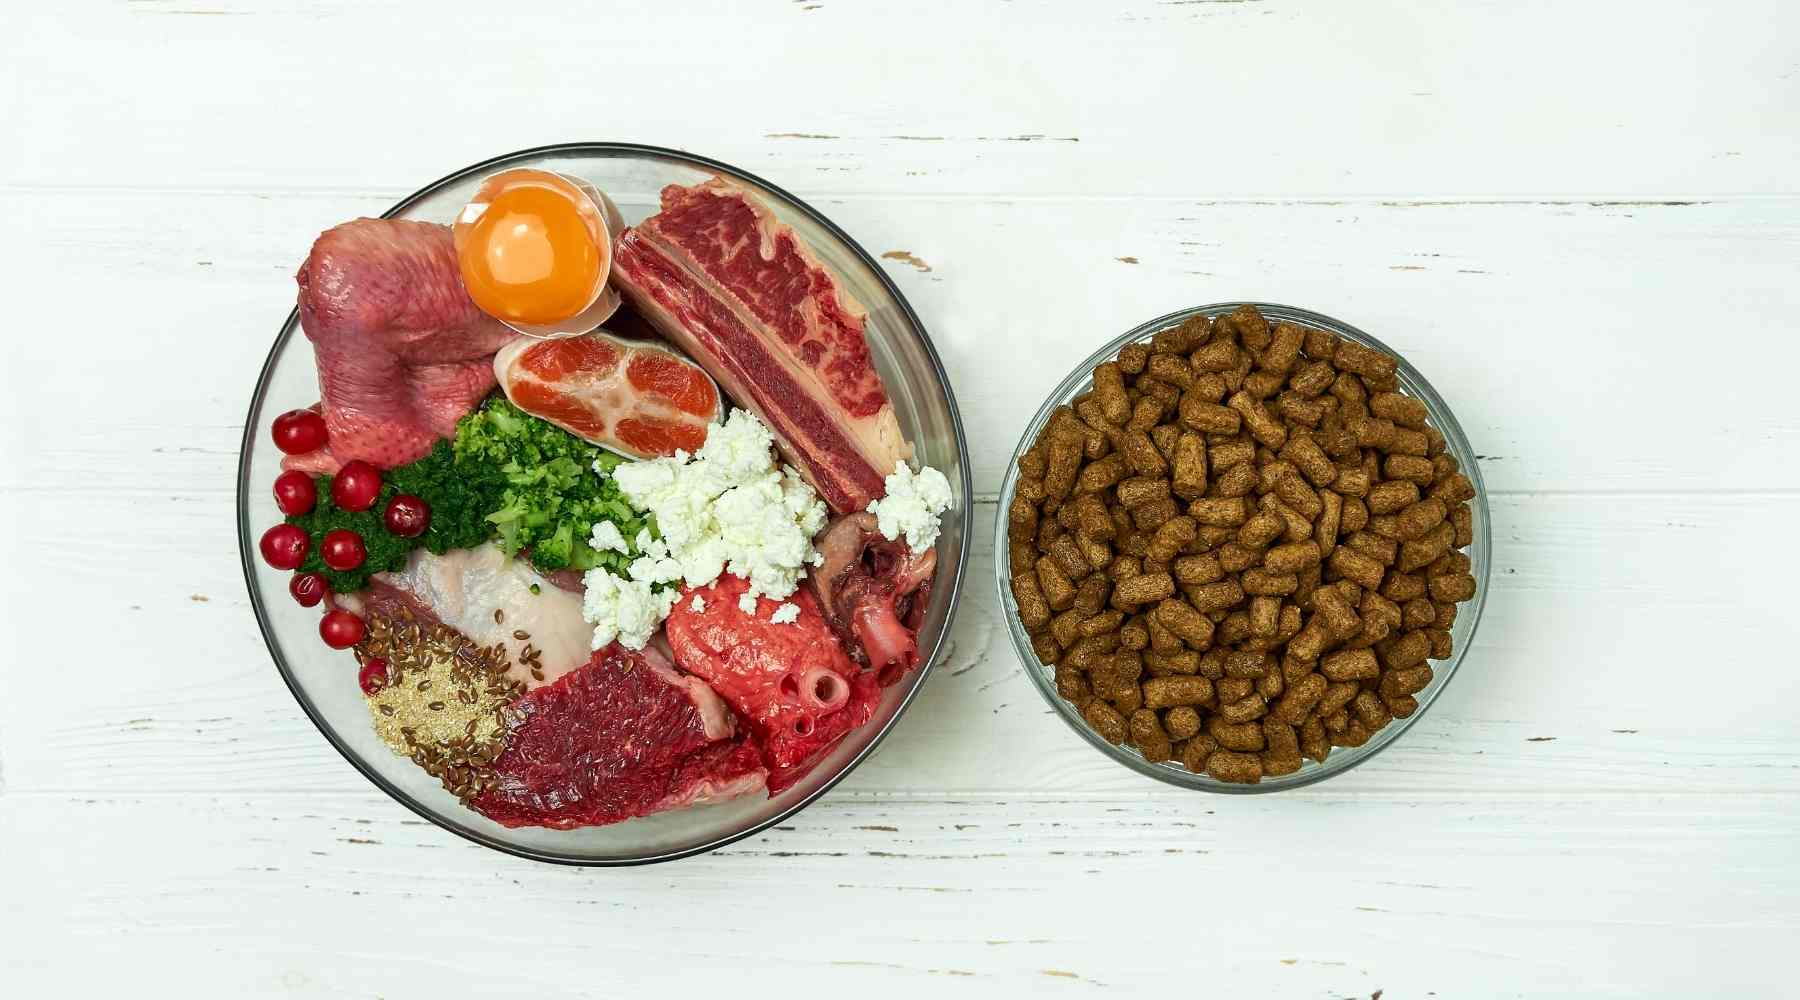 Is homemade dog food better than commercial brands?